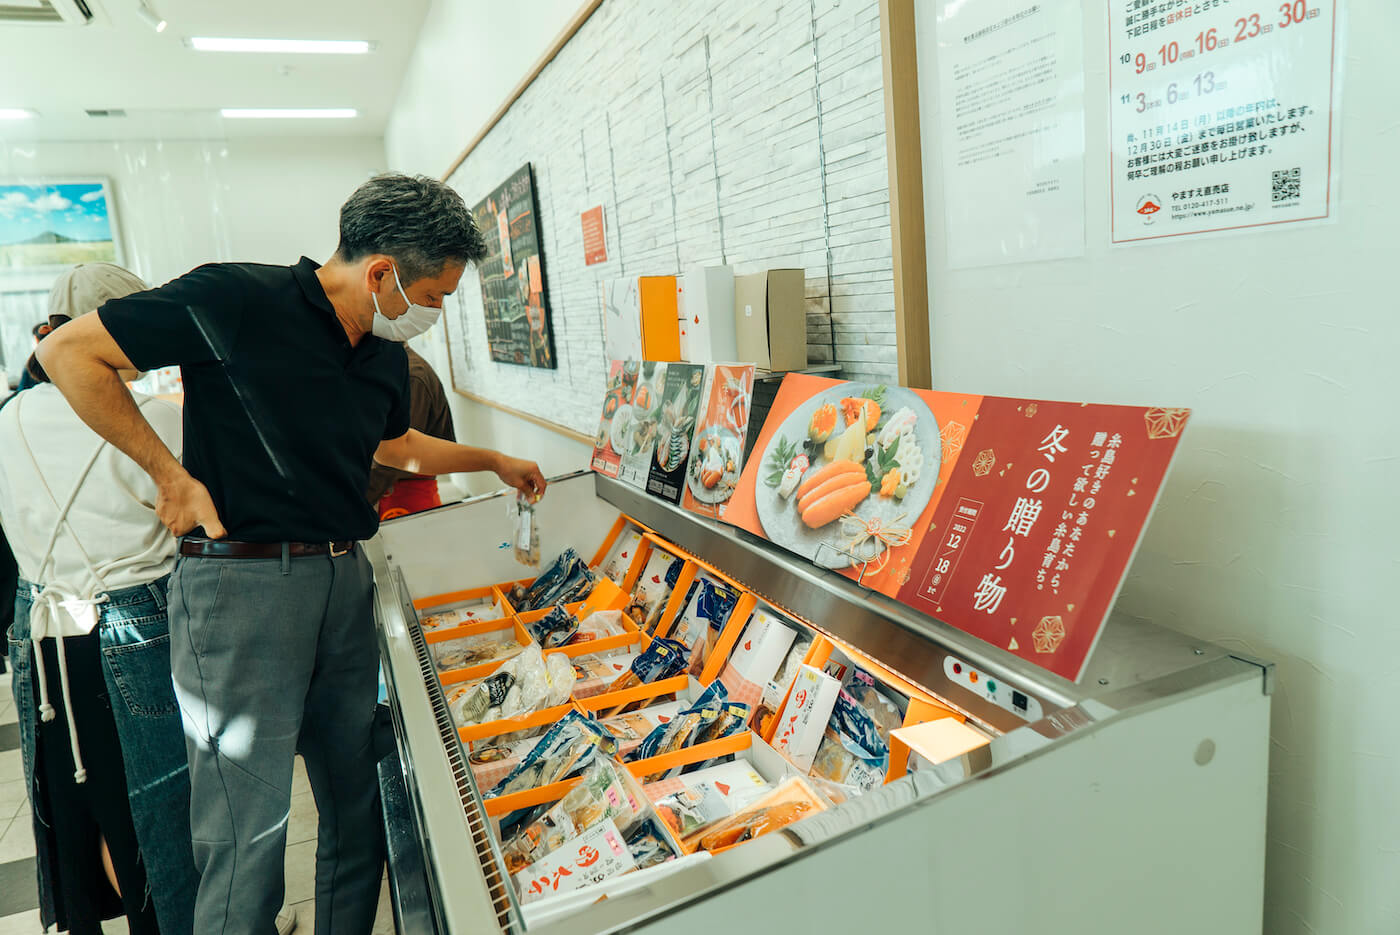  Takashi Baba - Creating a local trading company that enriches the lives of the people of Itoshima, 馬場孝志 – 糸島の人たちが潤う「糸島の地域商社」を目指して